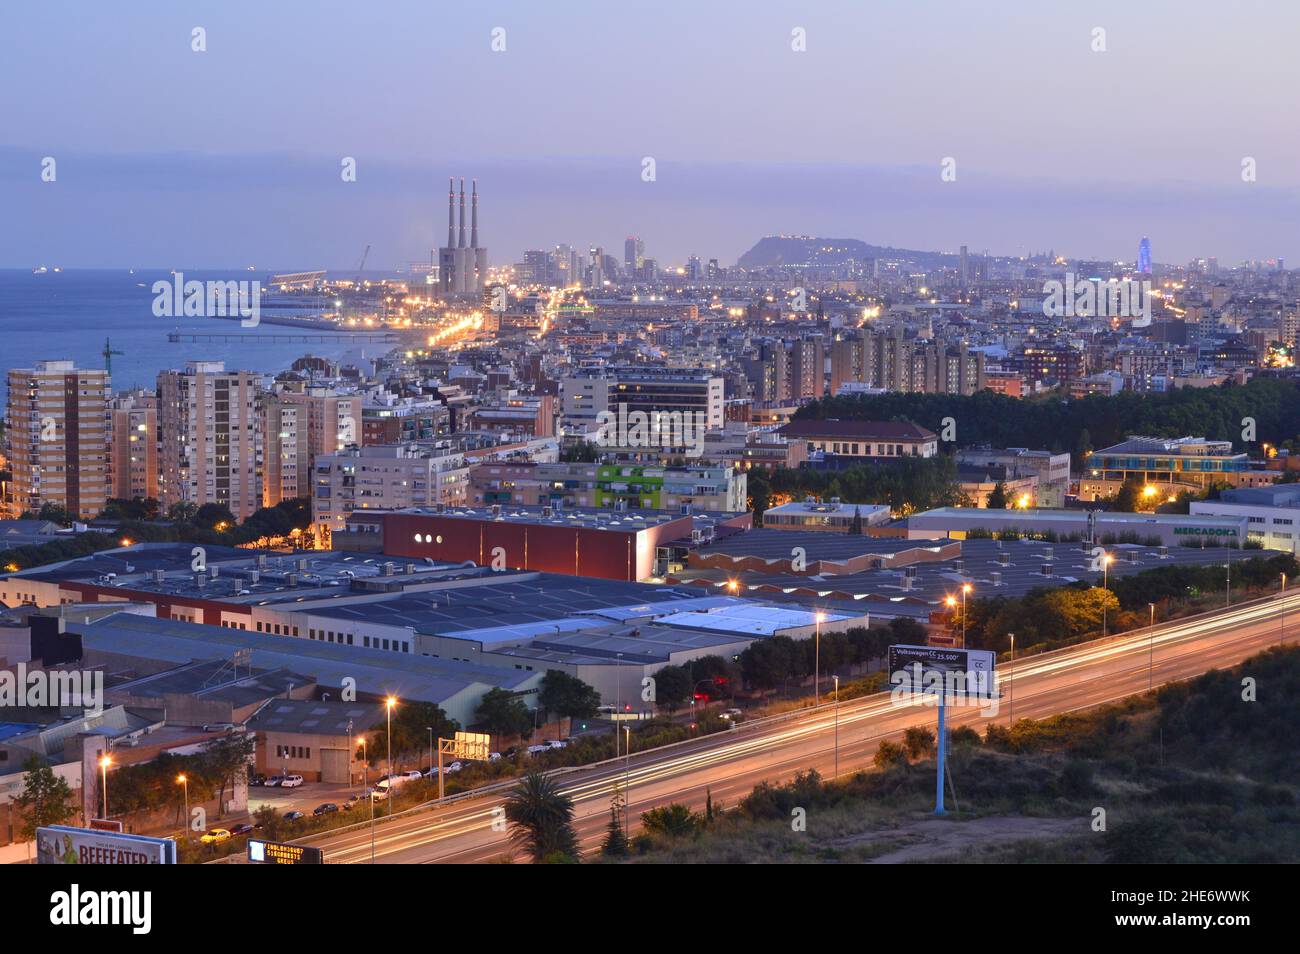 Industrial suburb of Badalona with warehouses and city of Barcelona in background, elevated view at dusk, Catalonia Spain. Stock Photo